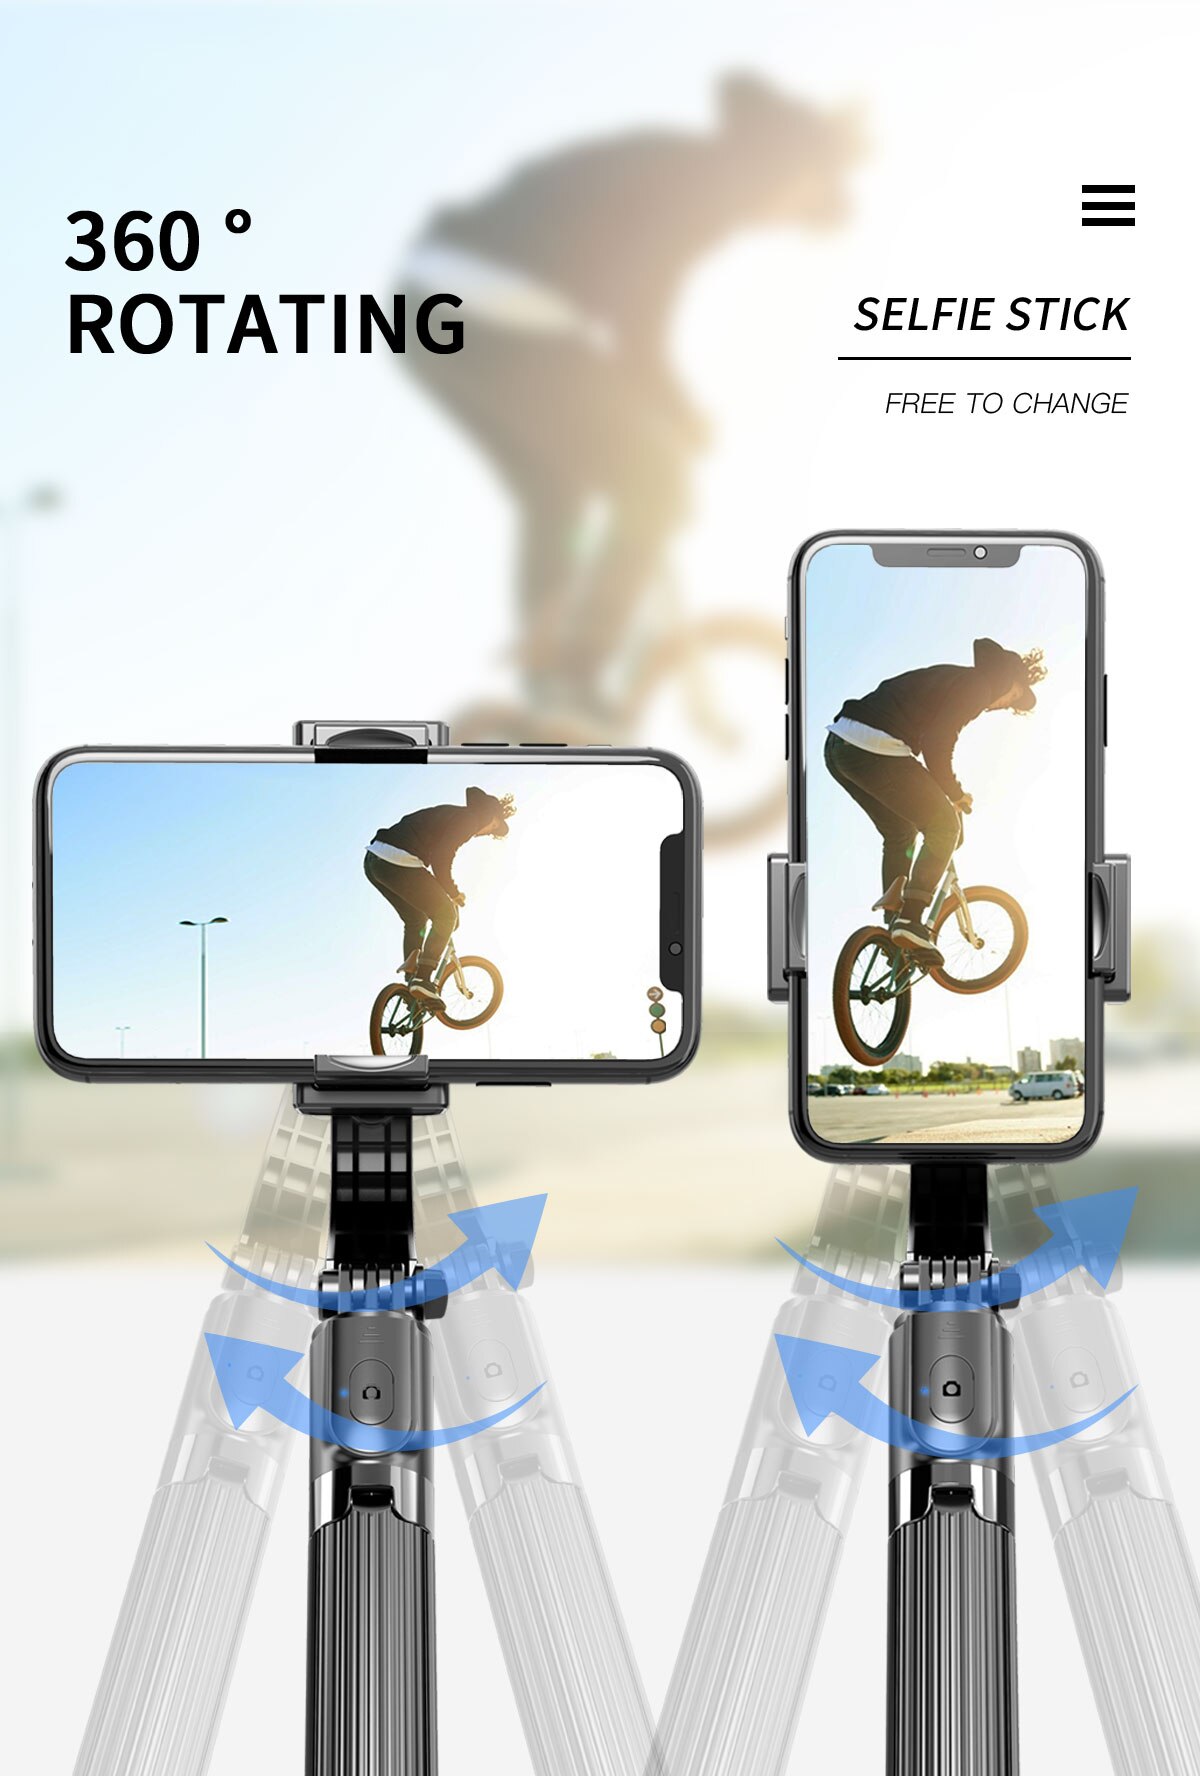 Handheld Gimbal Stabilizer Anti-Shake Selfie Stick Bluetooth Remote Control Tripod 360 Degree Smart Phone Holder For IOS Android